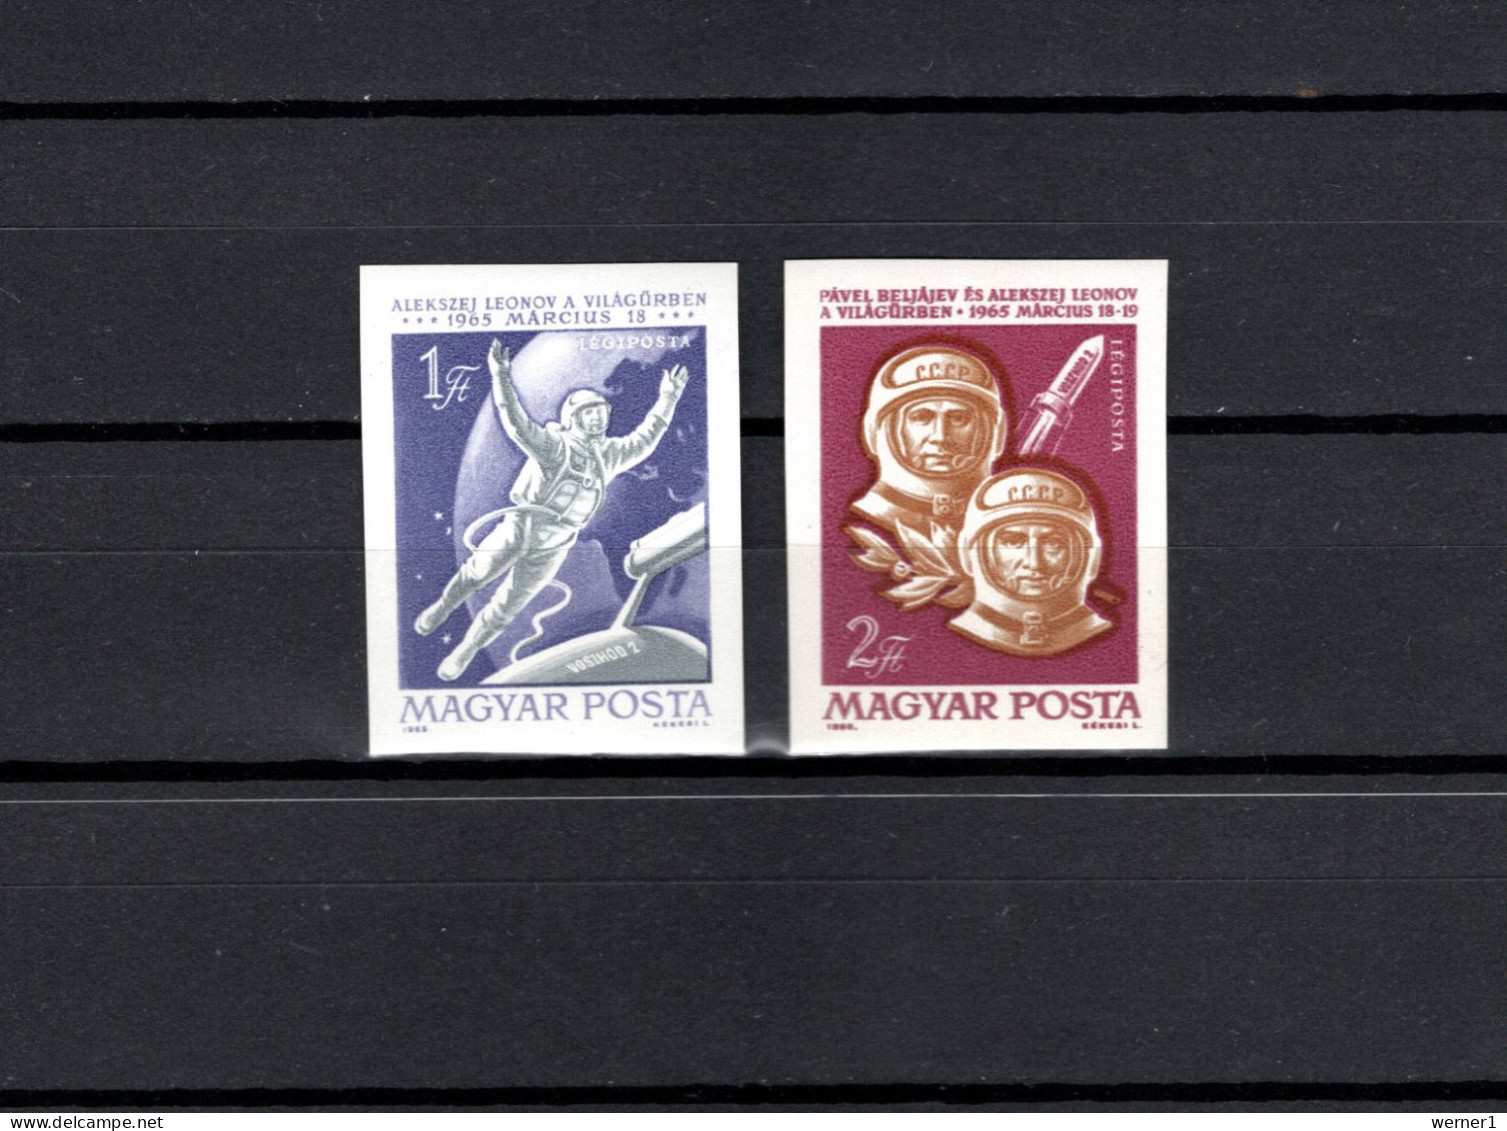 Hungary 1965 Space, Voshod 2, Set Of 2 Imperf. MNH -scarce- - Europe